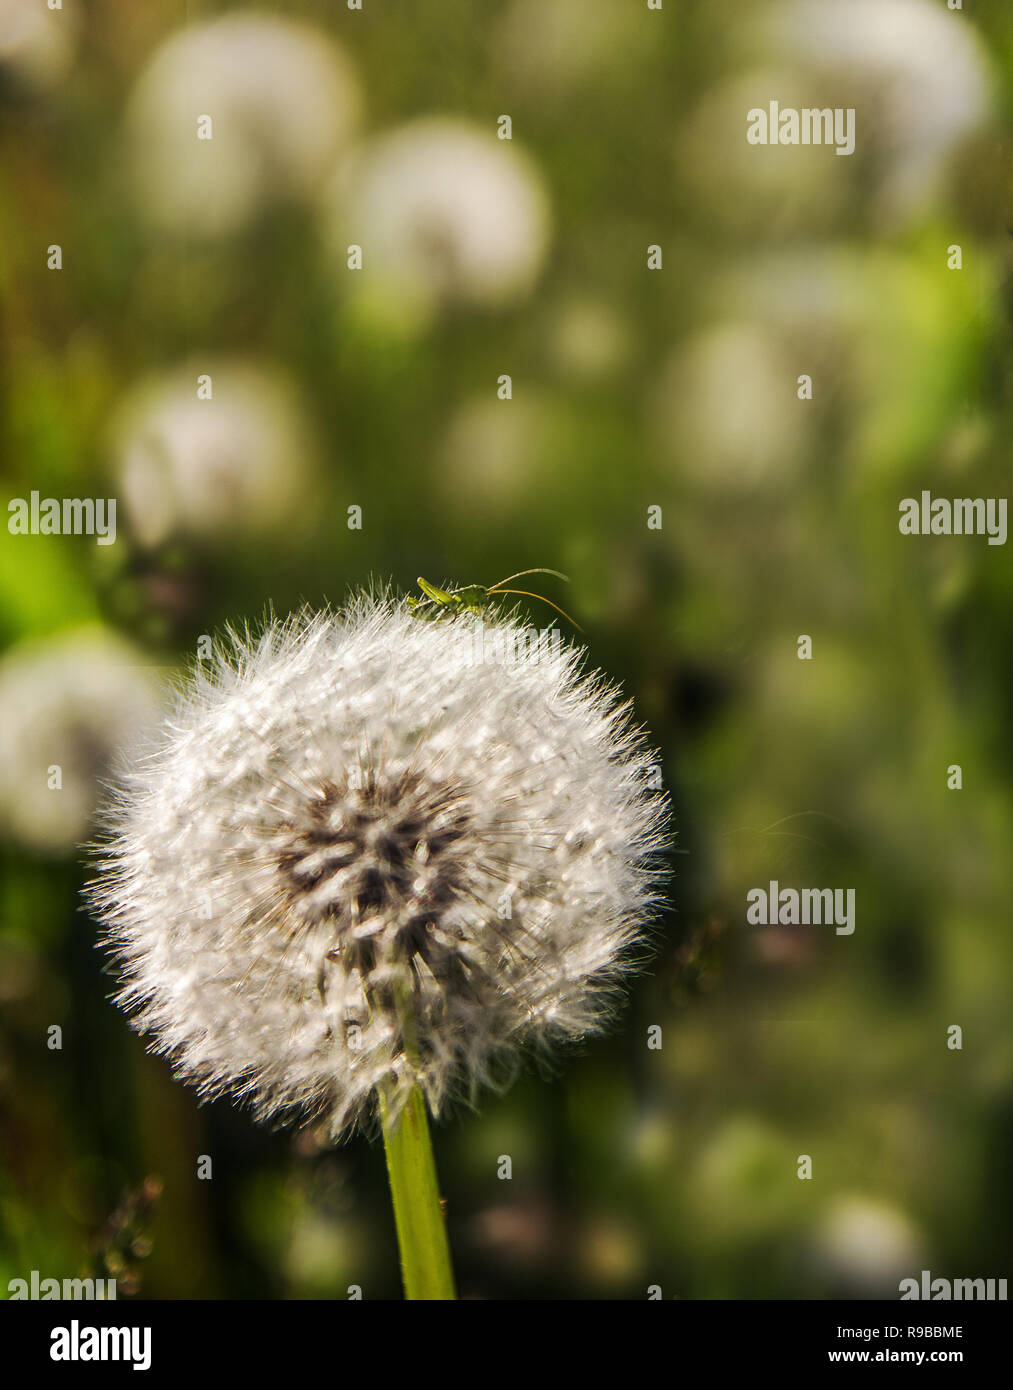 Small young green grasshopper resting on a dandelion's fluffy head Stock Photo